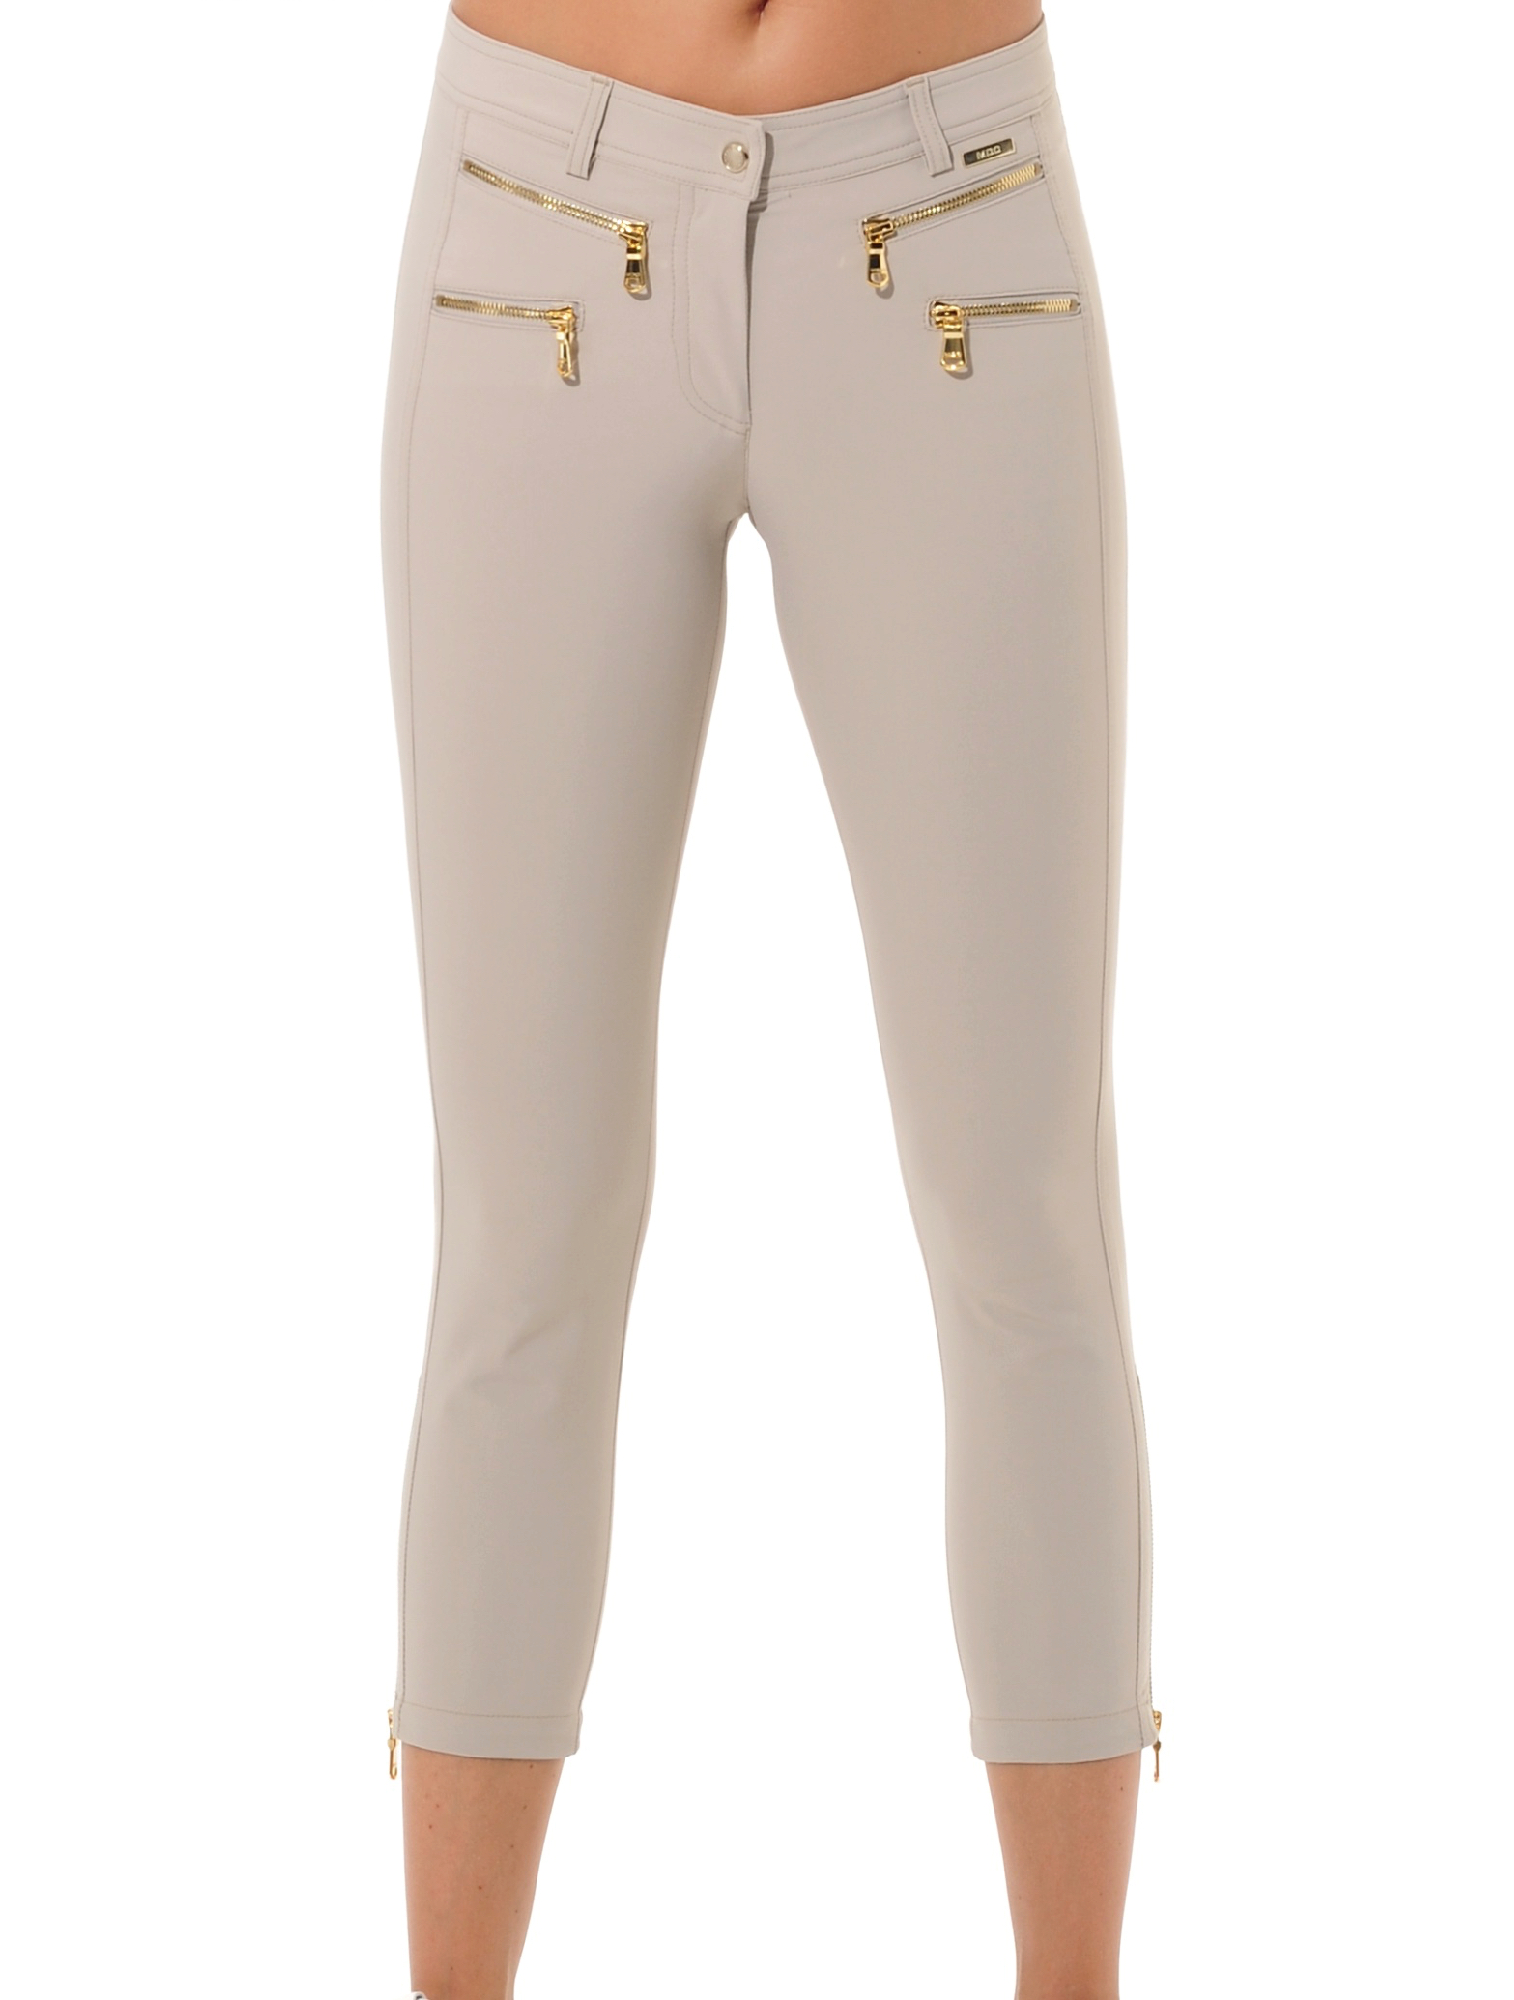 4way stretch shiny gold double zip cropped pants light taupe 